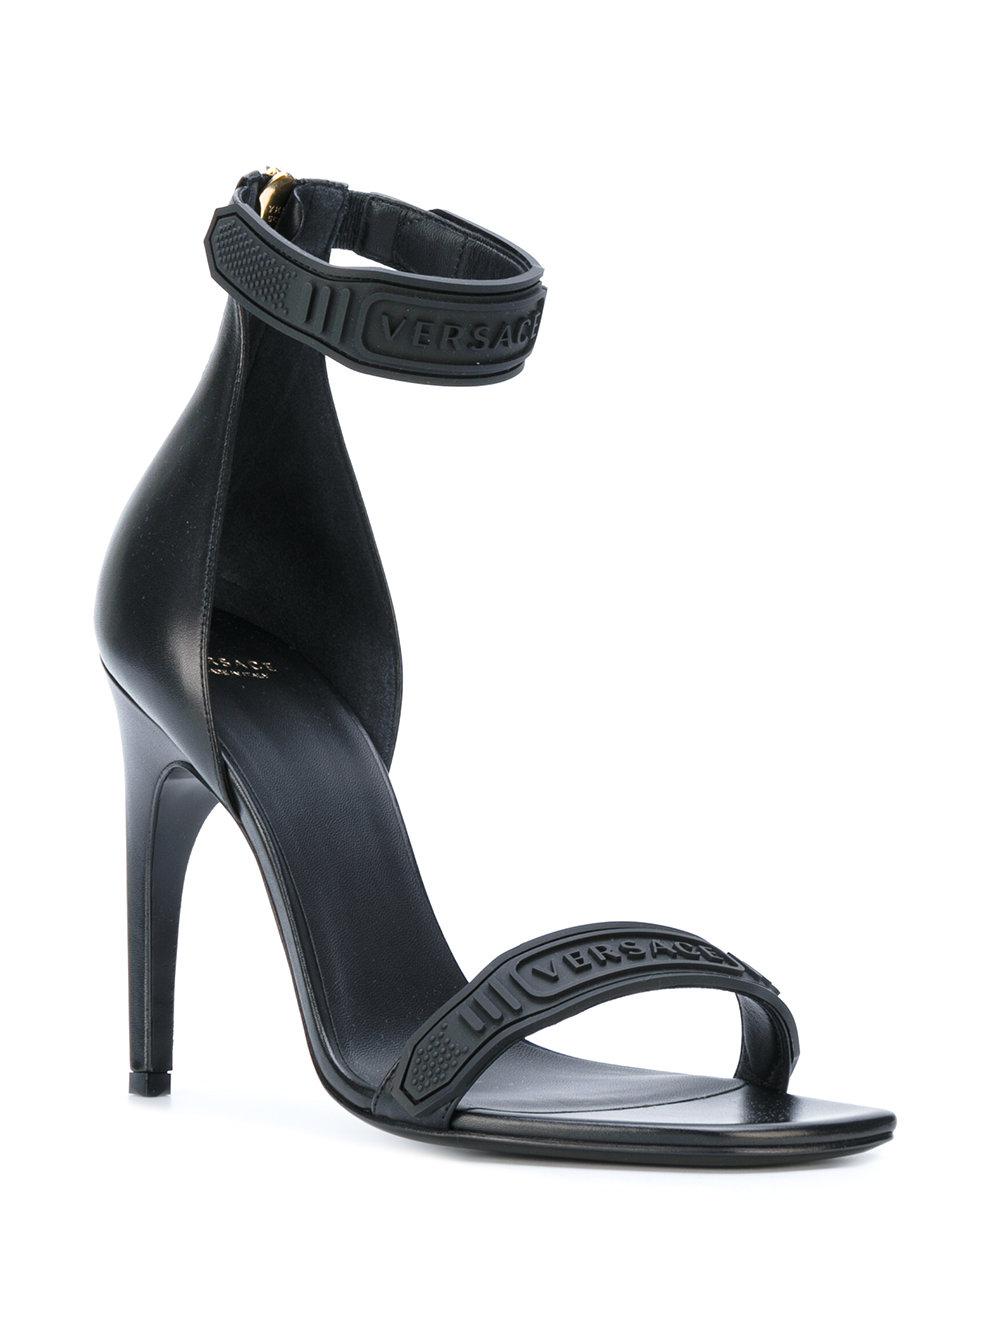 Lyst - Versace Logo Ankle Strap Sandals in Black